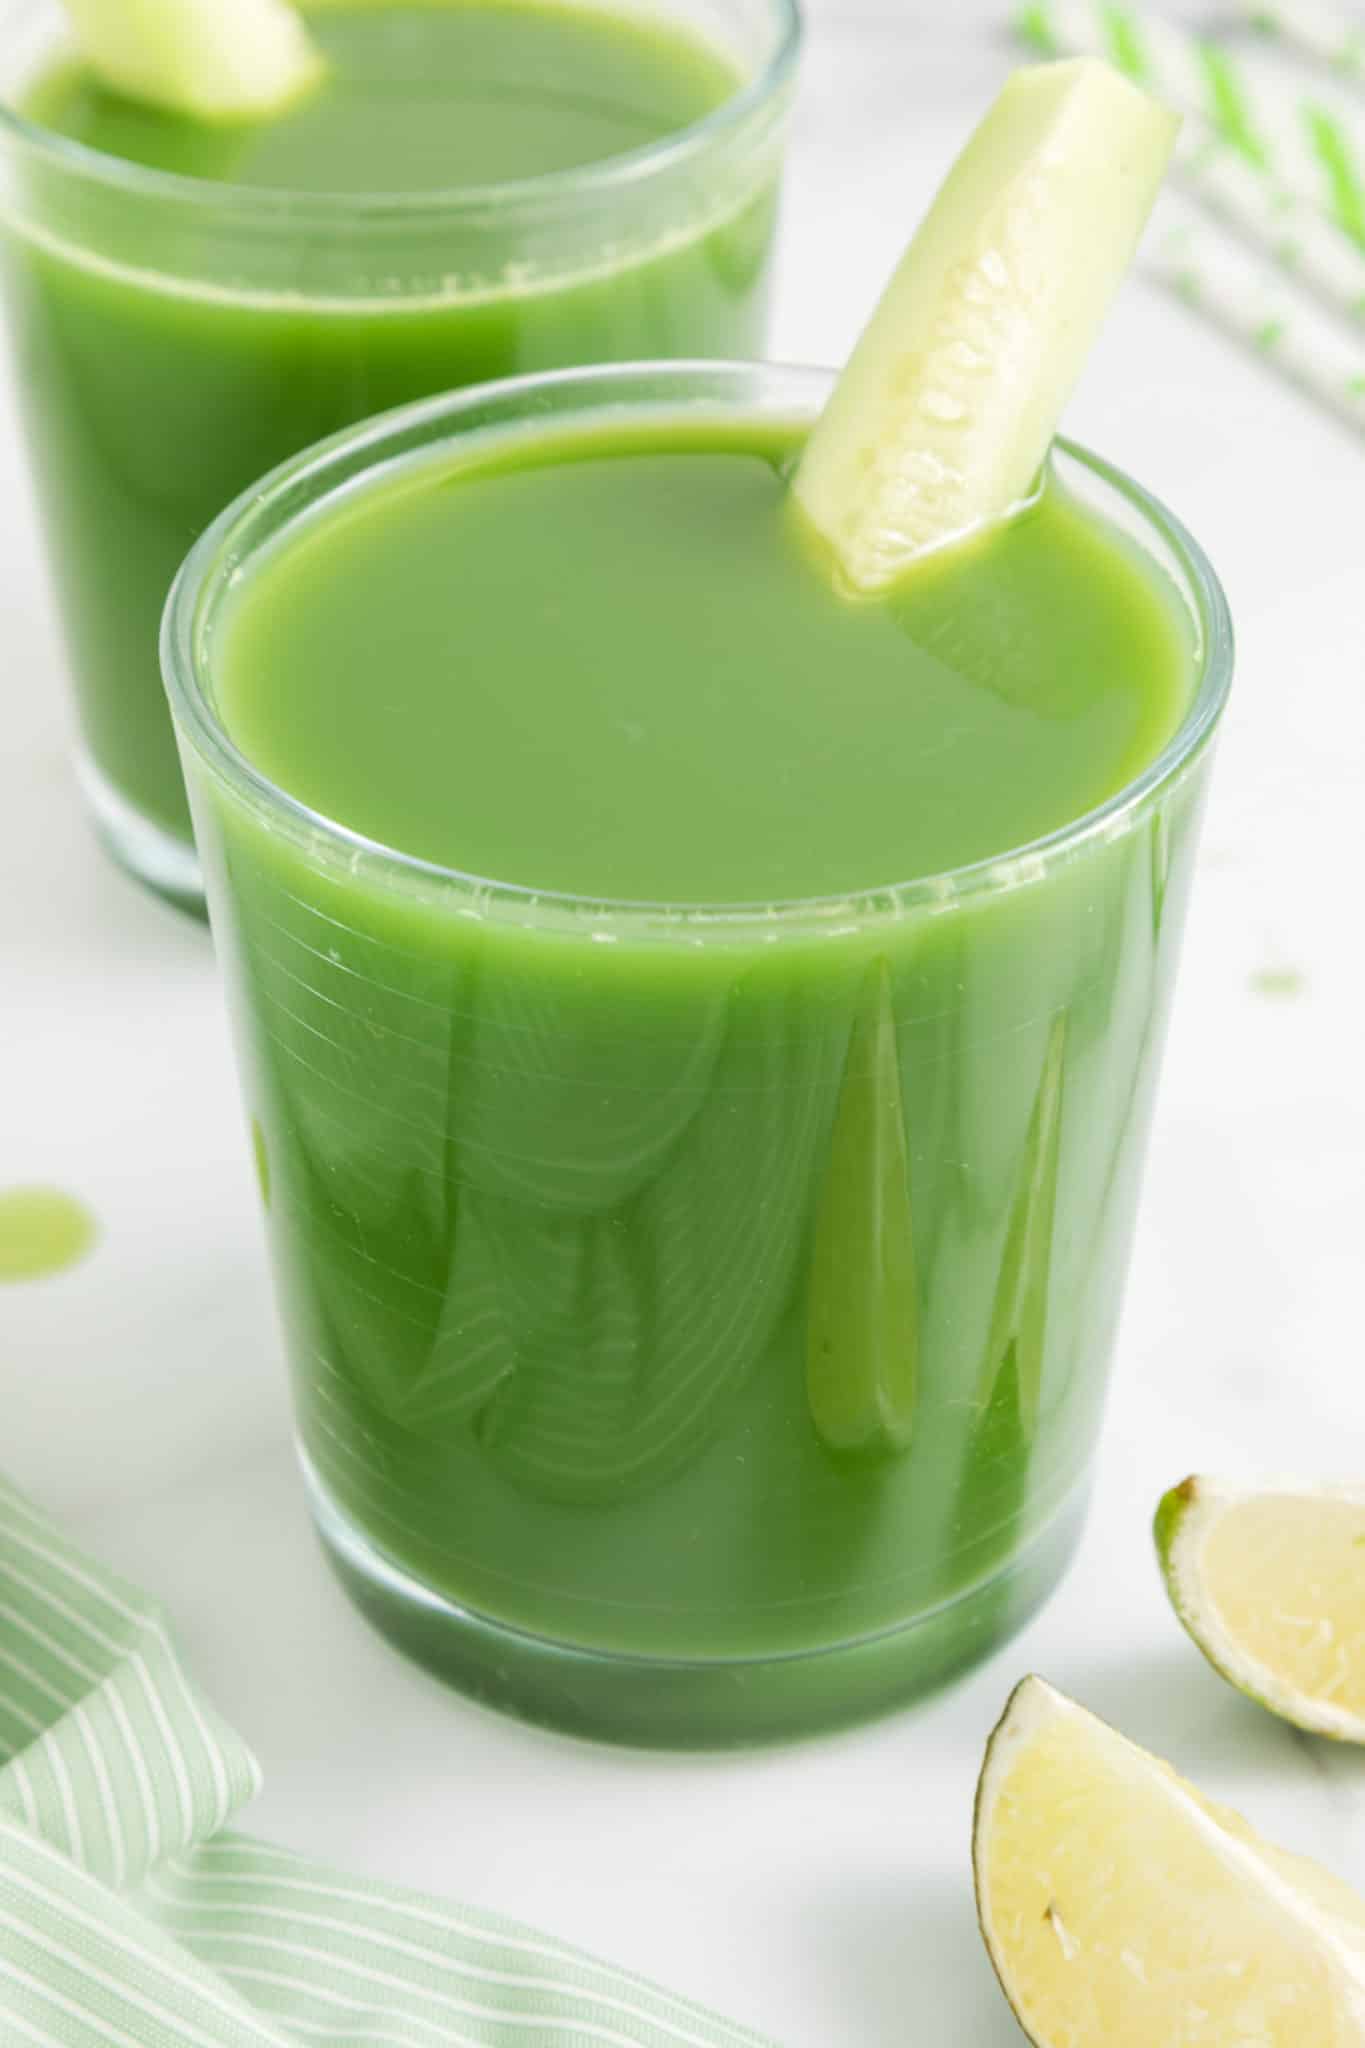 Top view of a glass of cucumber juice with a lime wedge on the rim.